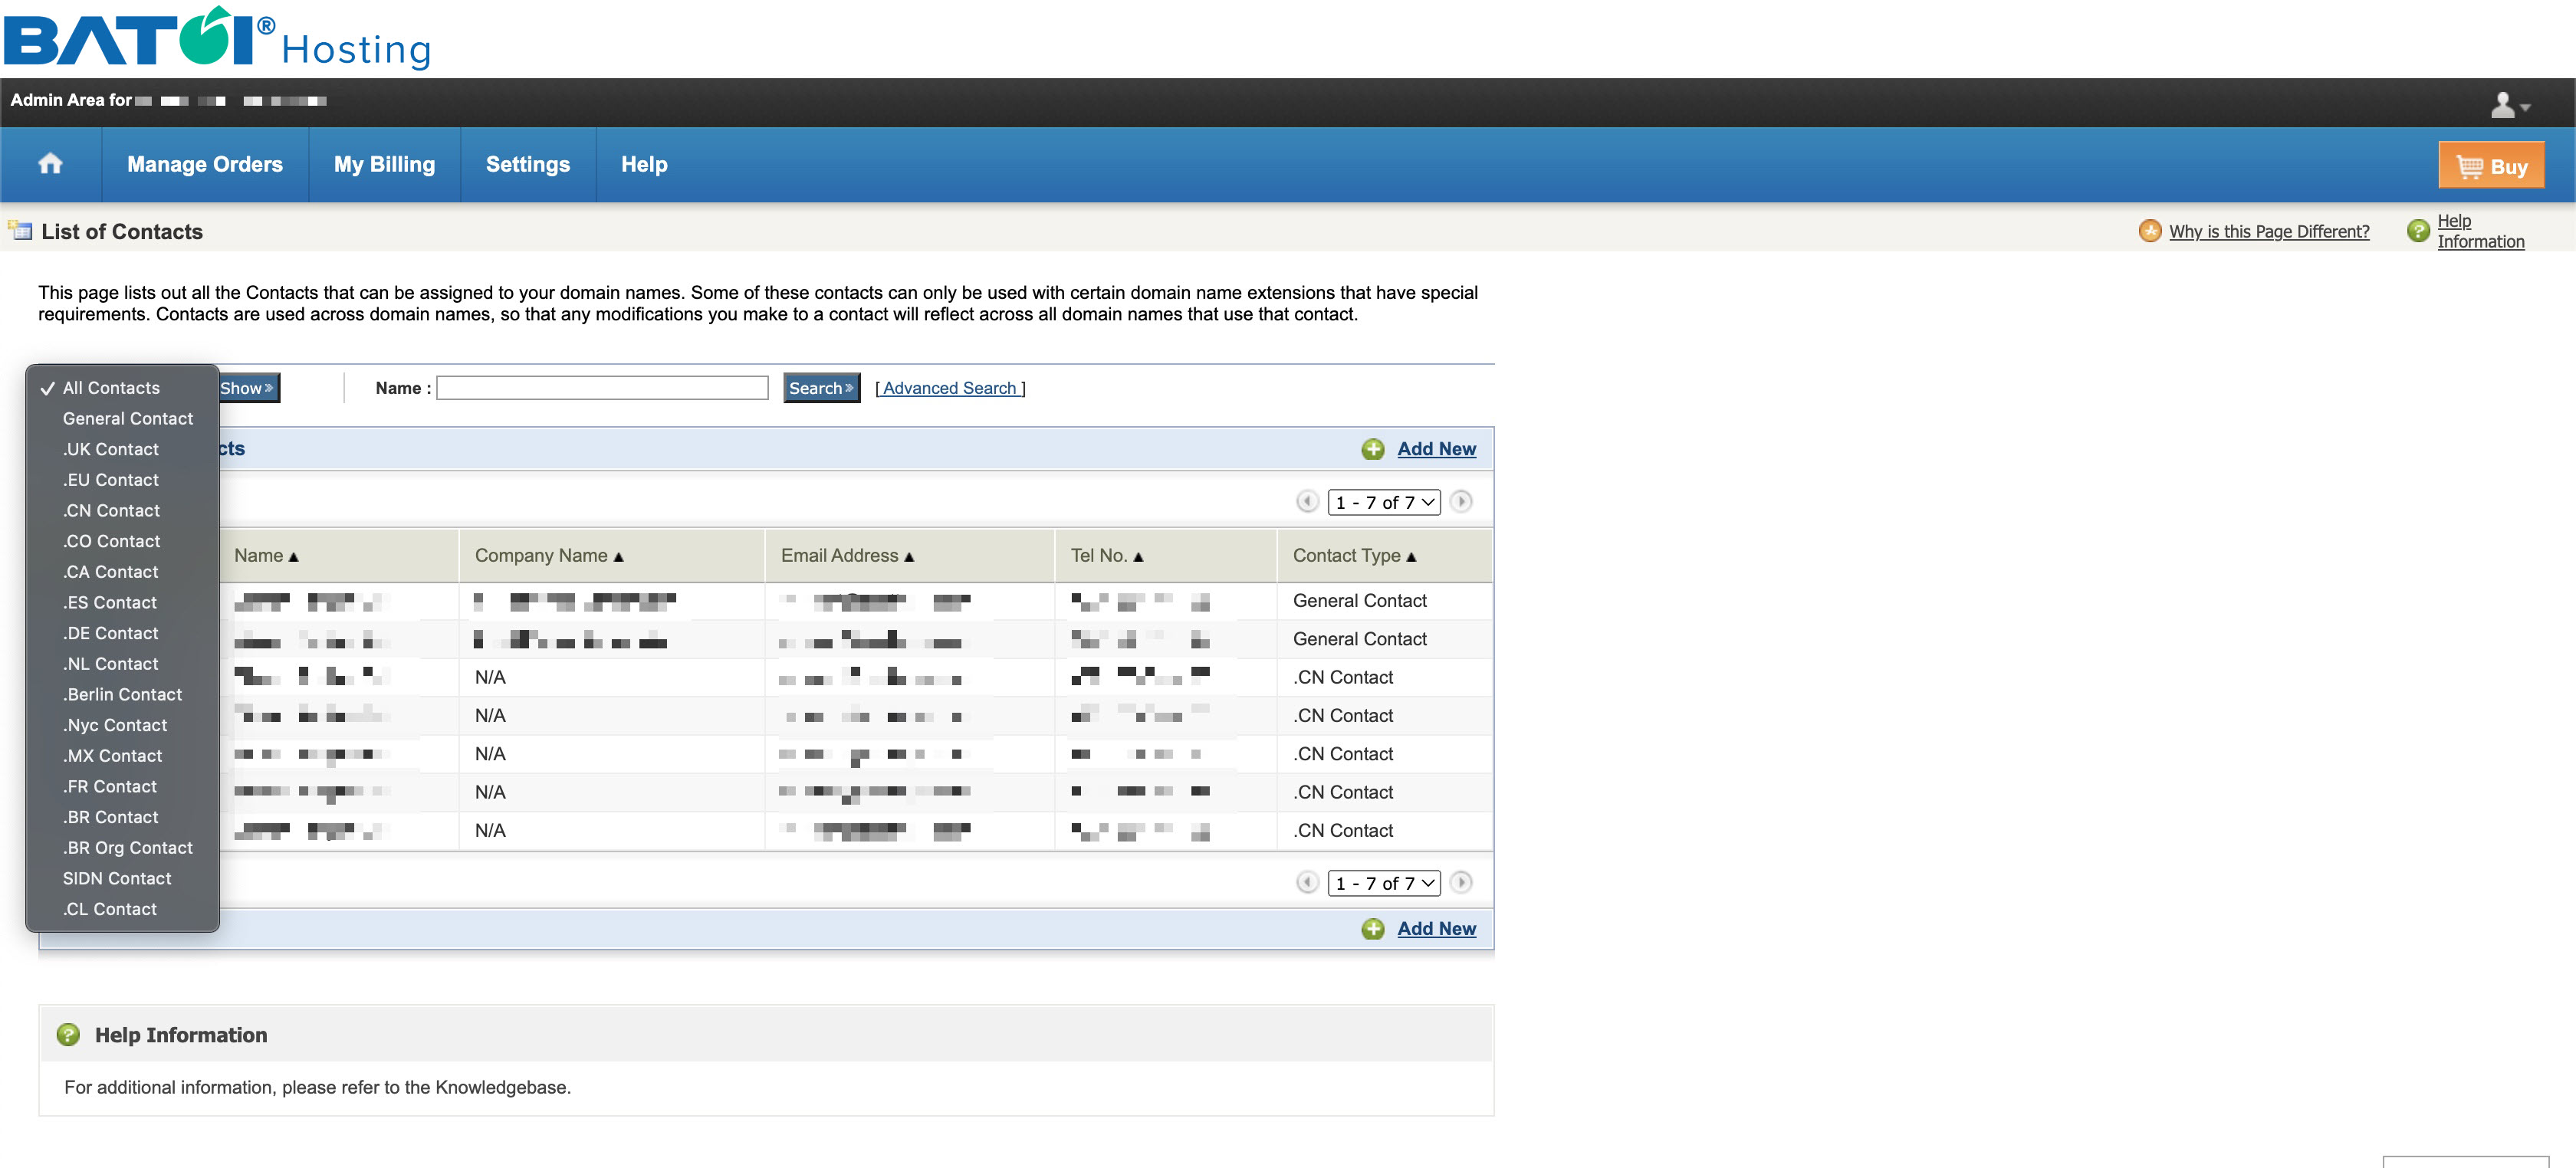 Figure 4: My Batoi Hosting Contact Management Filter Option in List Page